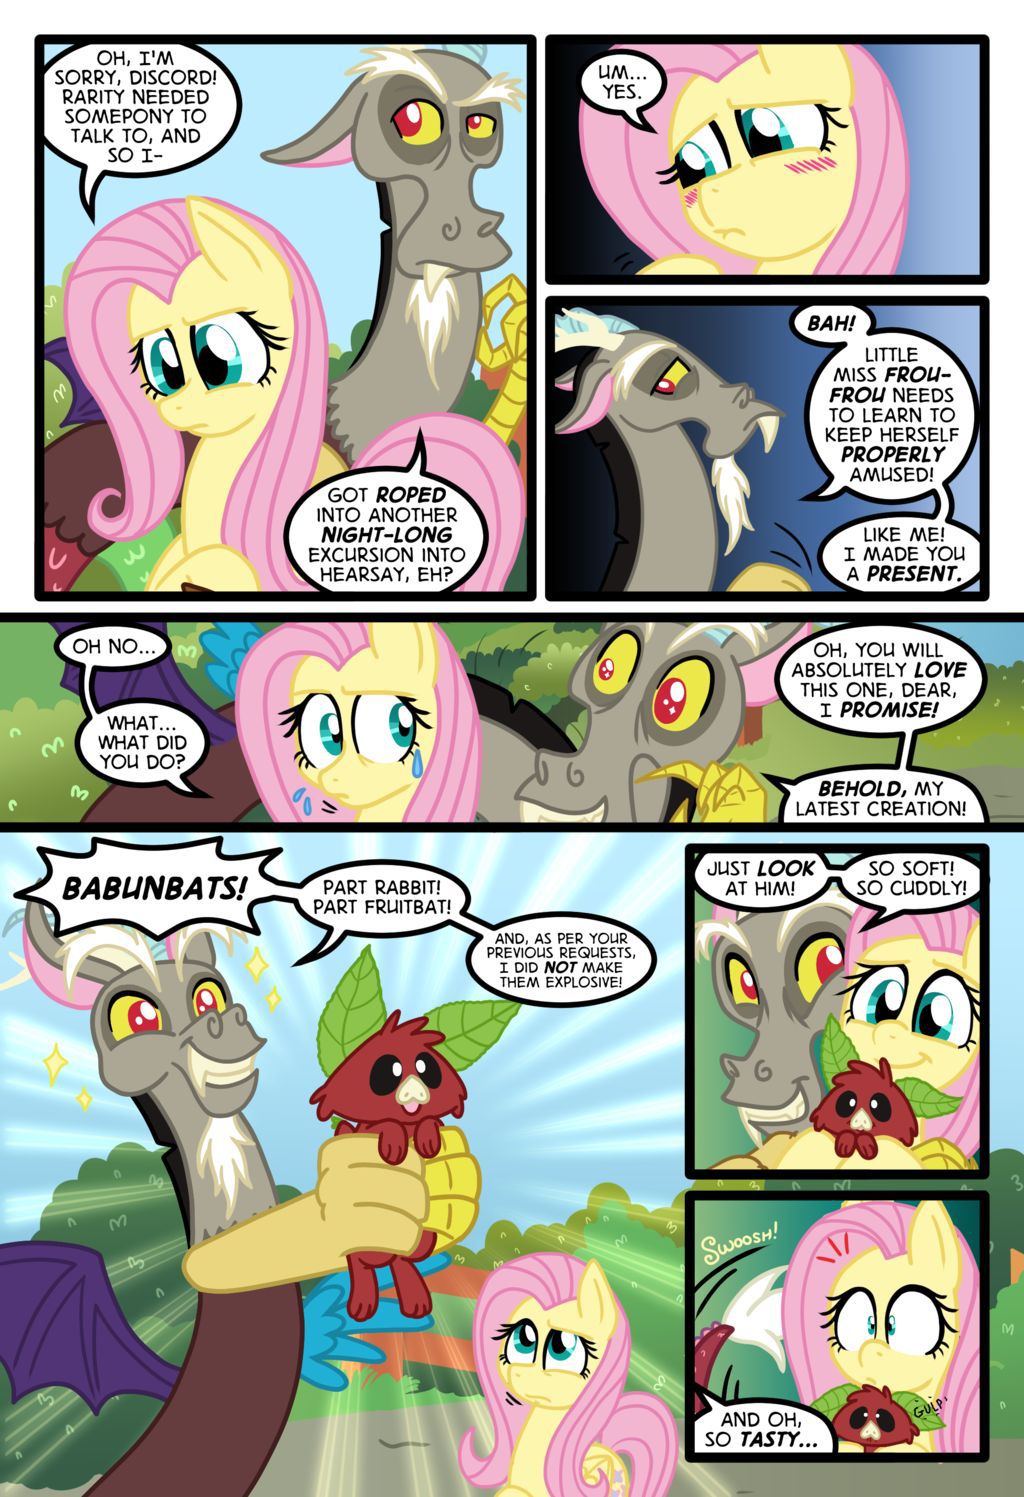 [Zaron] Lonely Hooves (My Little Pony: Friendship is Magic) [English] [Ongoing] 36